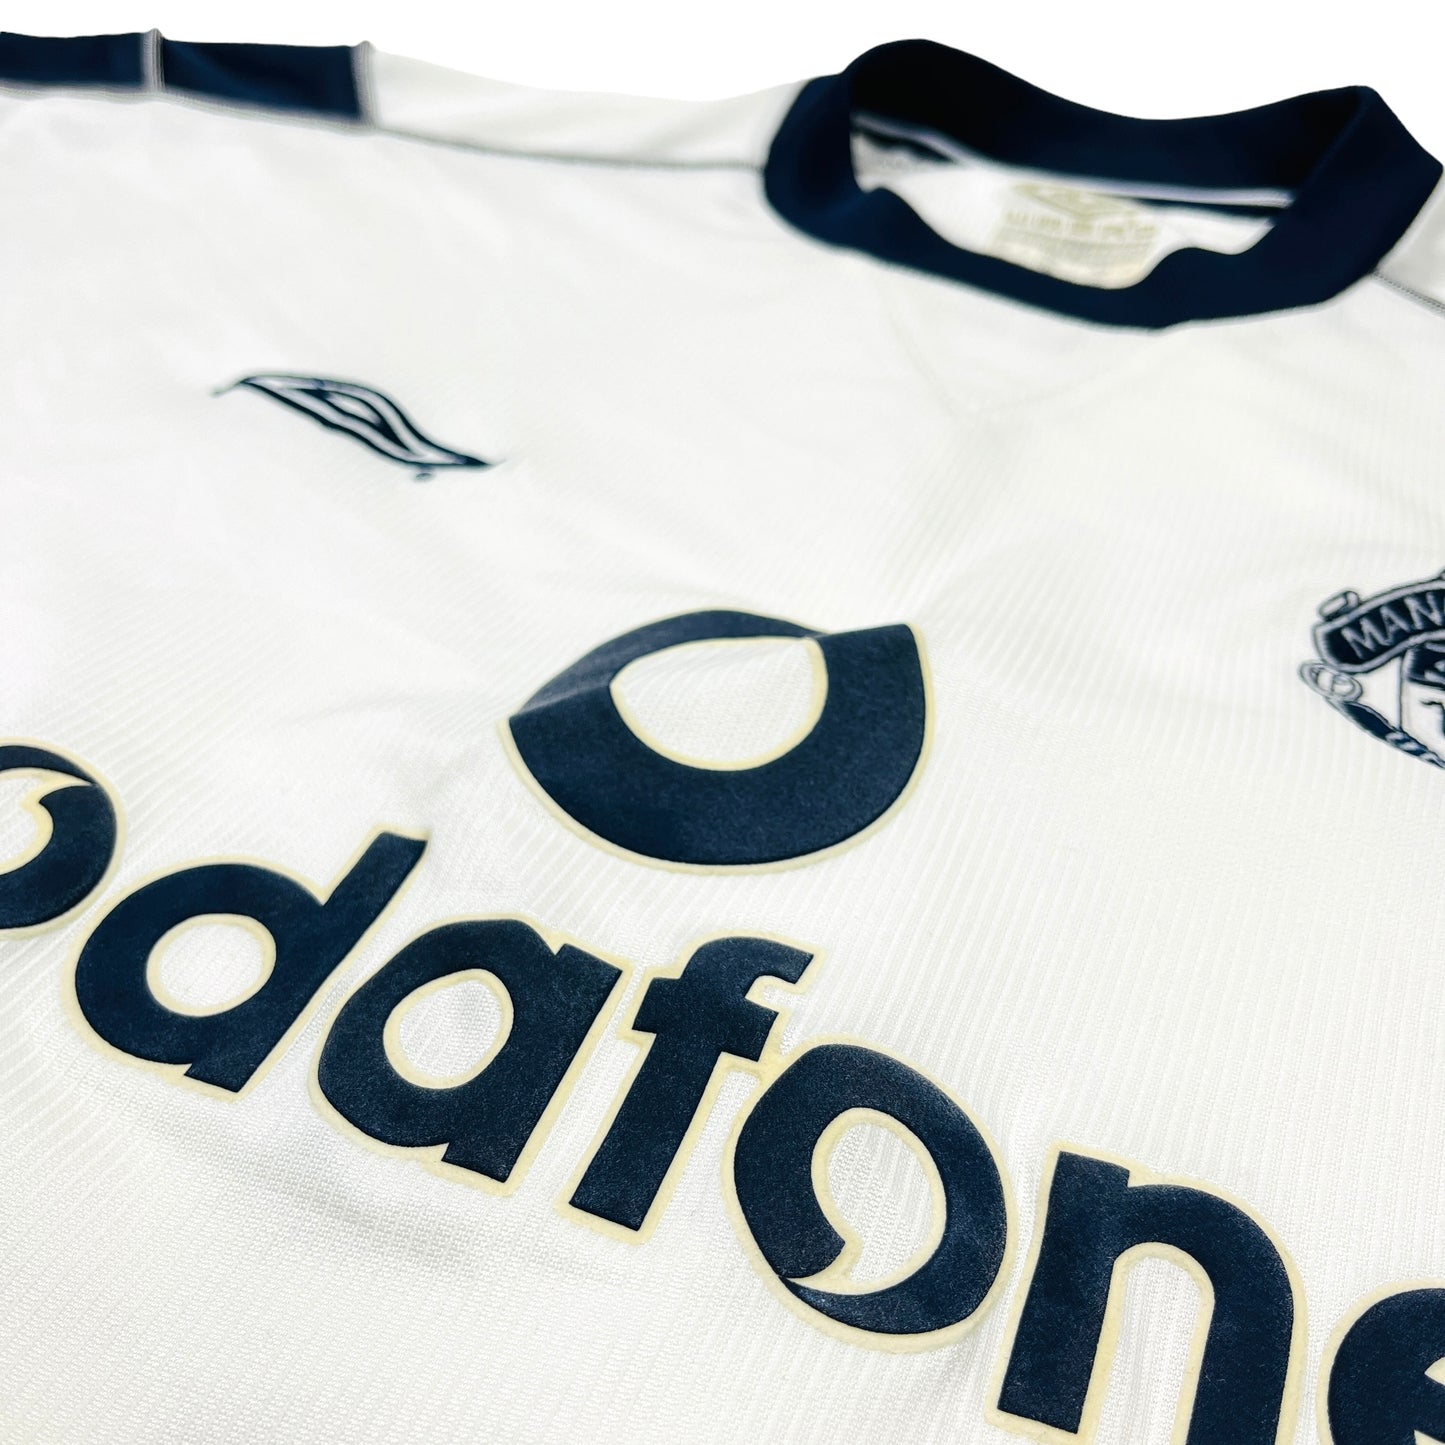 01212 Umbro Manchester United 99/00 Away Jersey